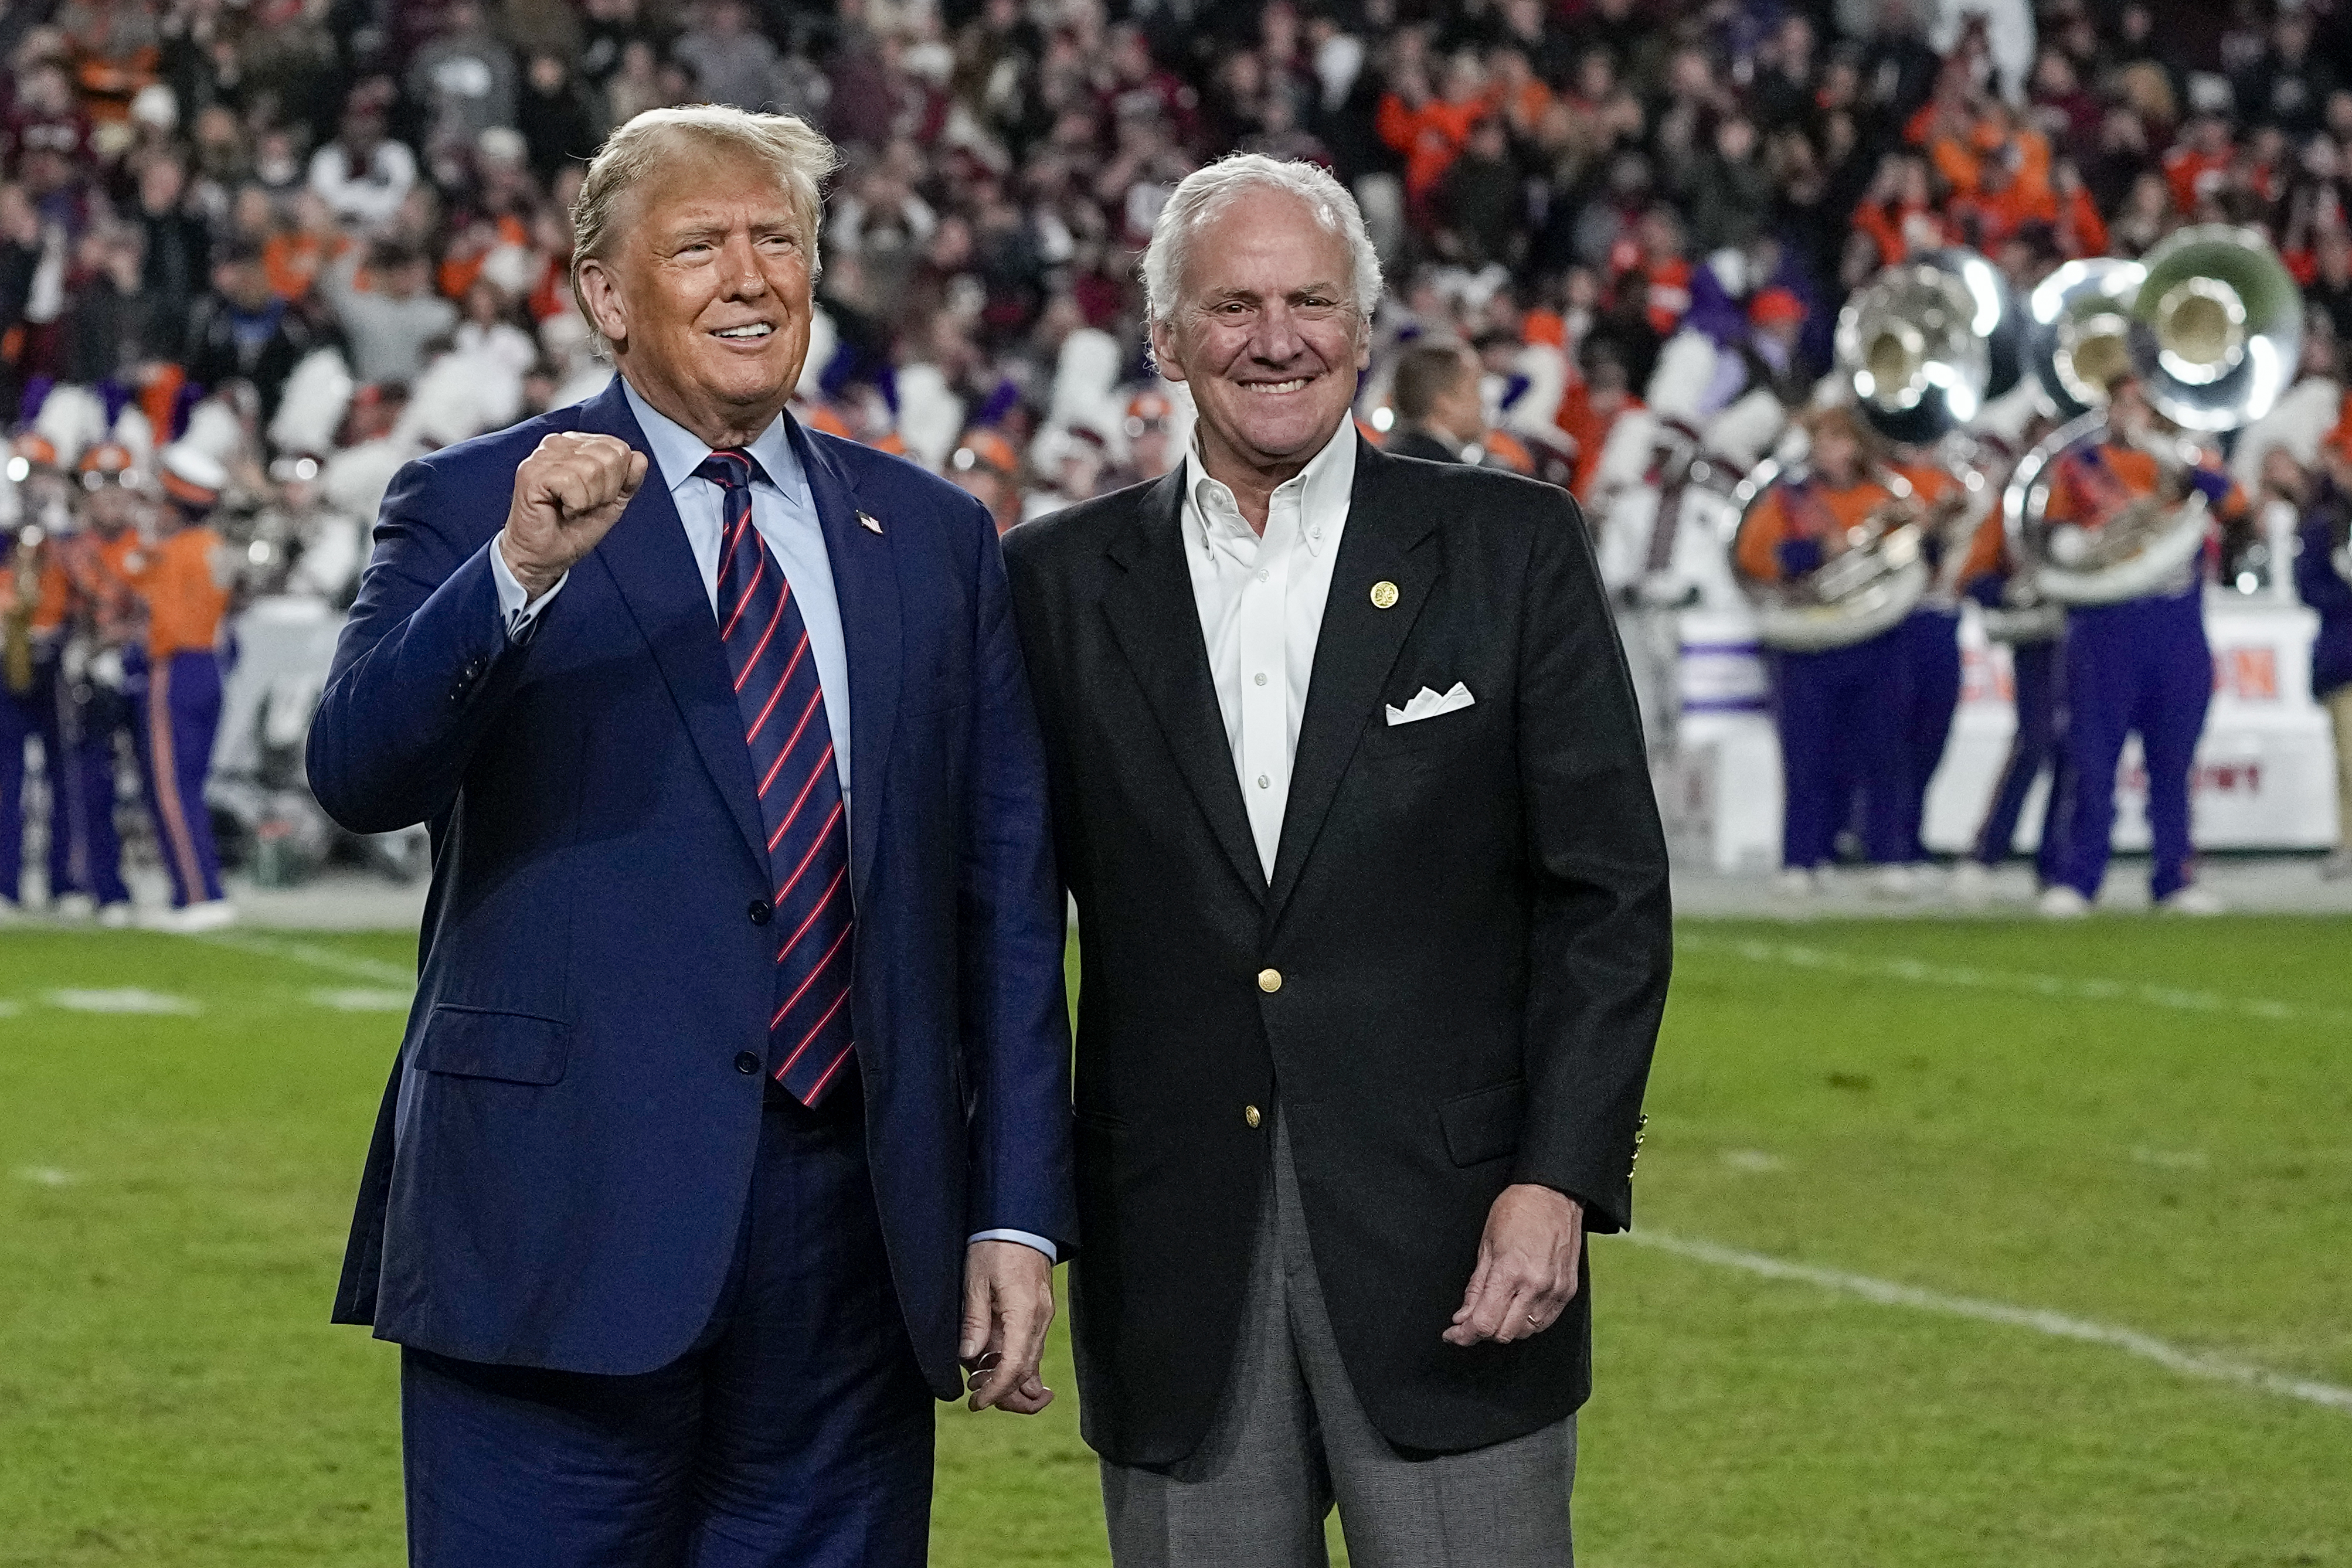 Former President Donald Trump gestures with South Carolina Gov. Henry McMaster during halftime at an NCAA football game between the University of South Carolina and Clemson University in Columbia, South Carolina, on November 25.